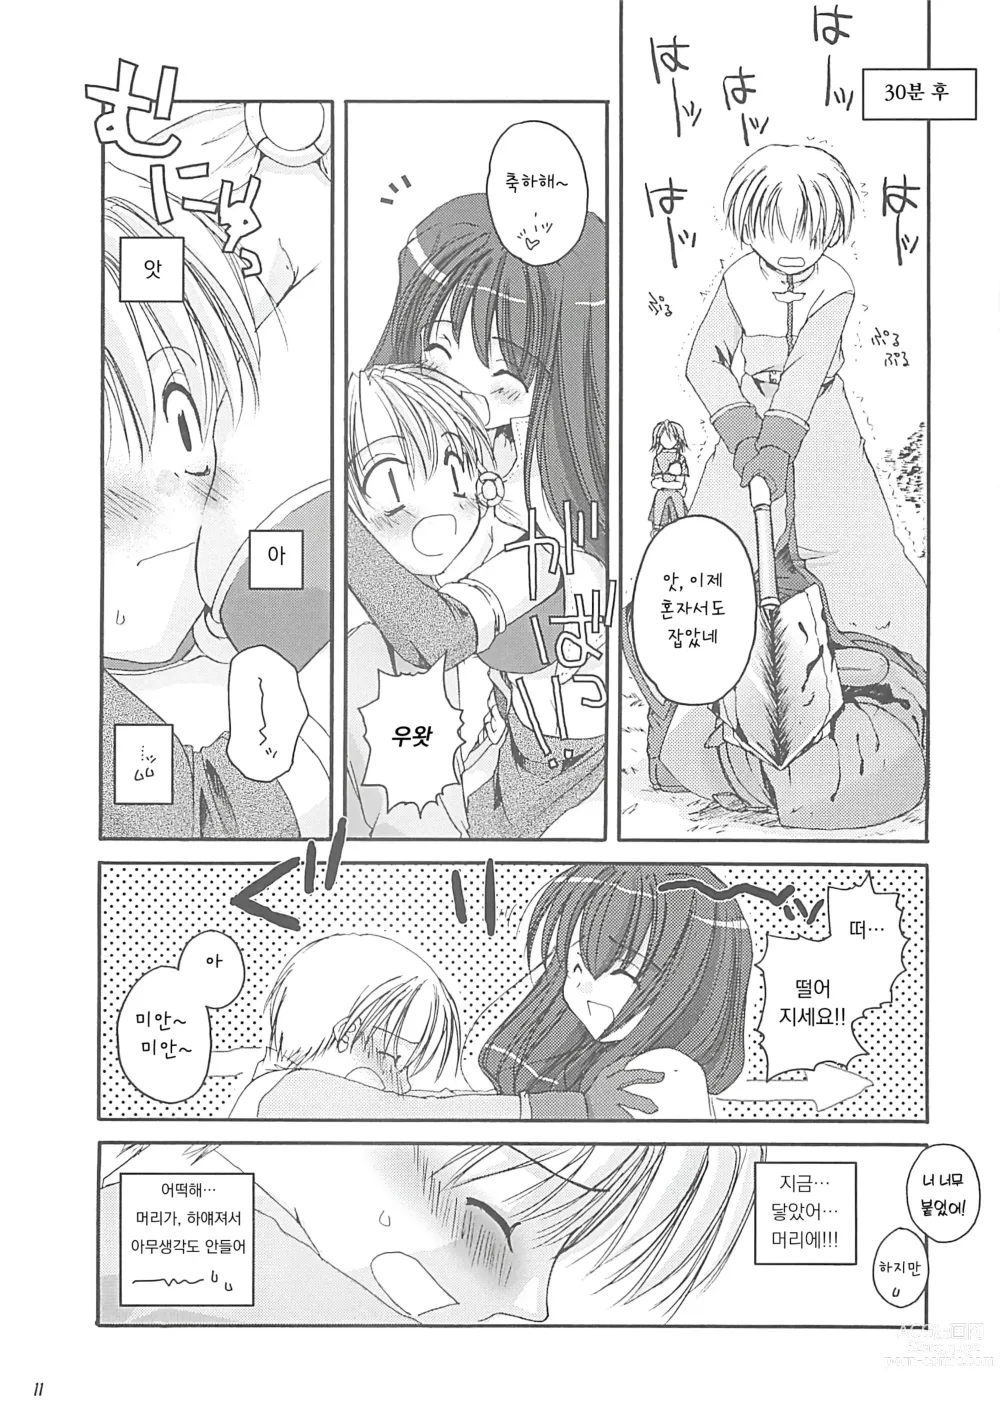 Page 10 of doujinshi D.L. Action 13